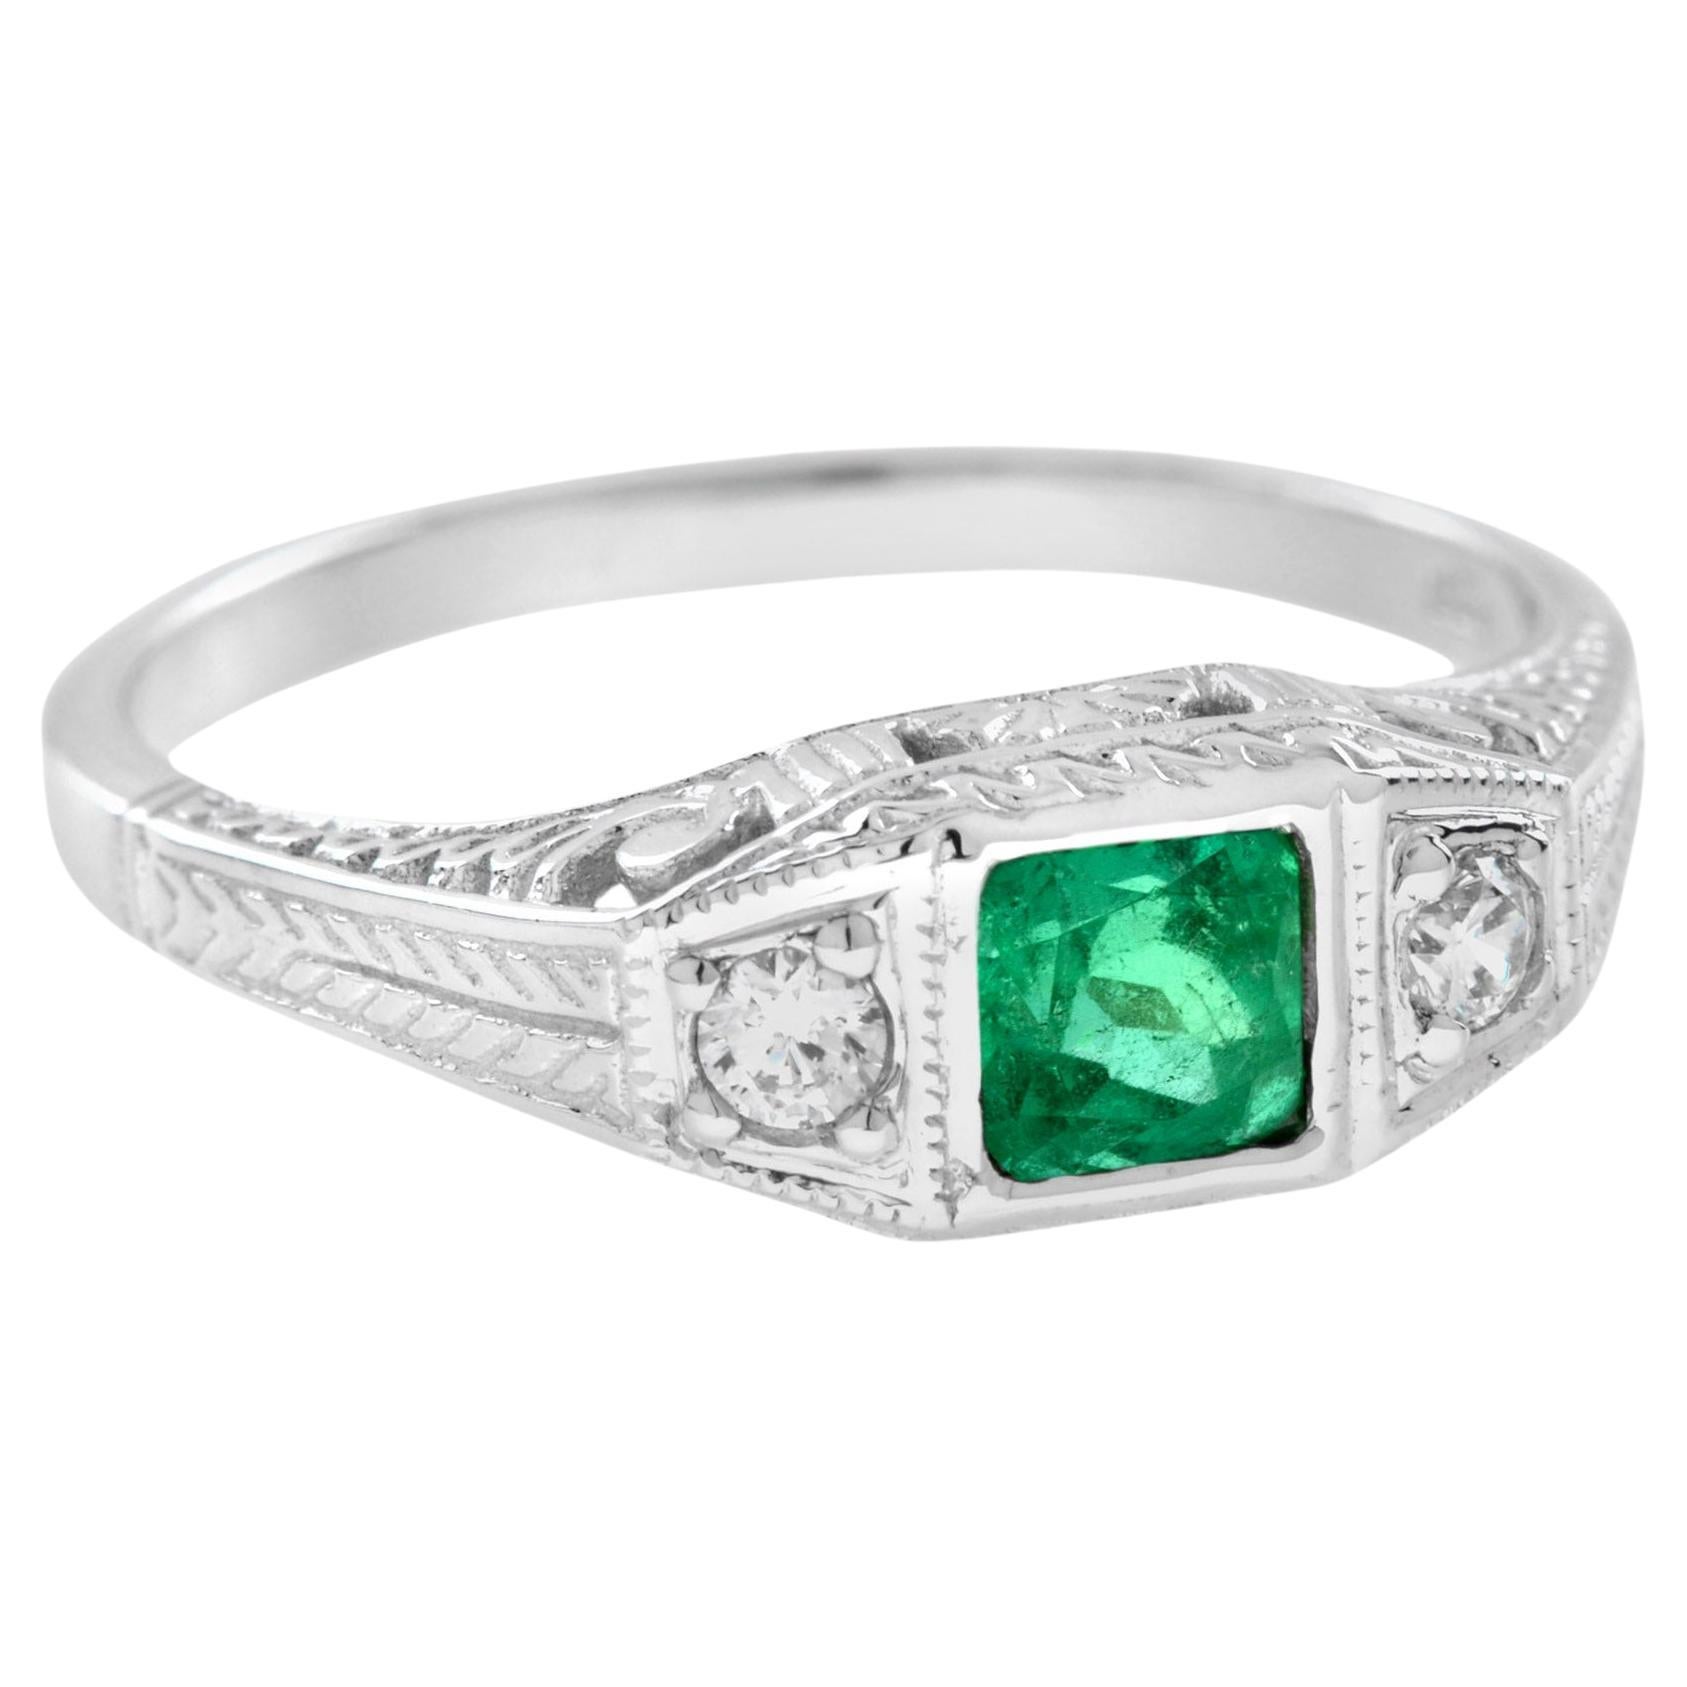 For Sale:  Square Emerald and Diamond Antique Style Three Stone Ring in 14K White Gold